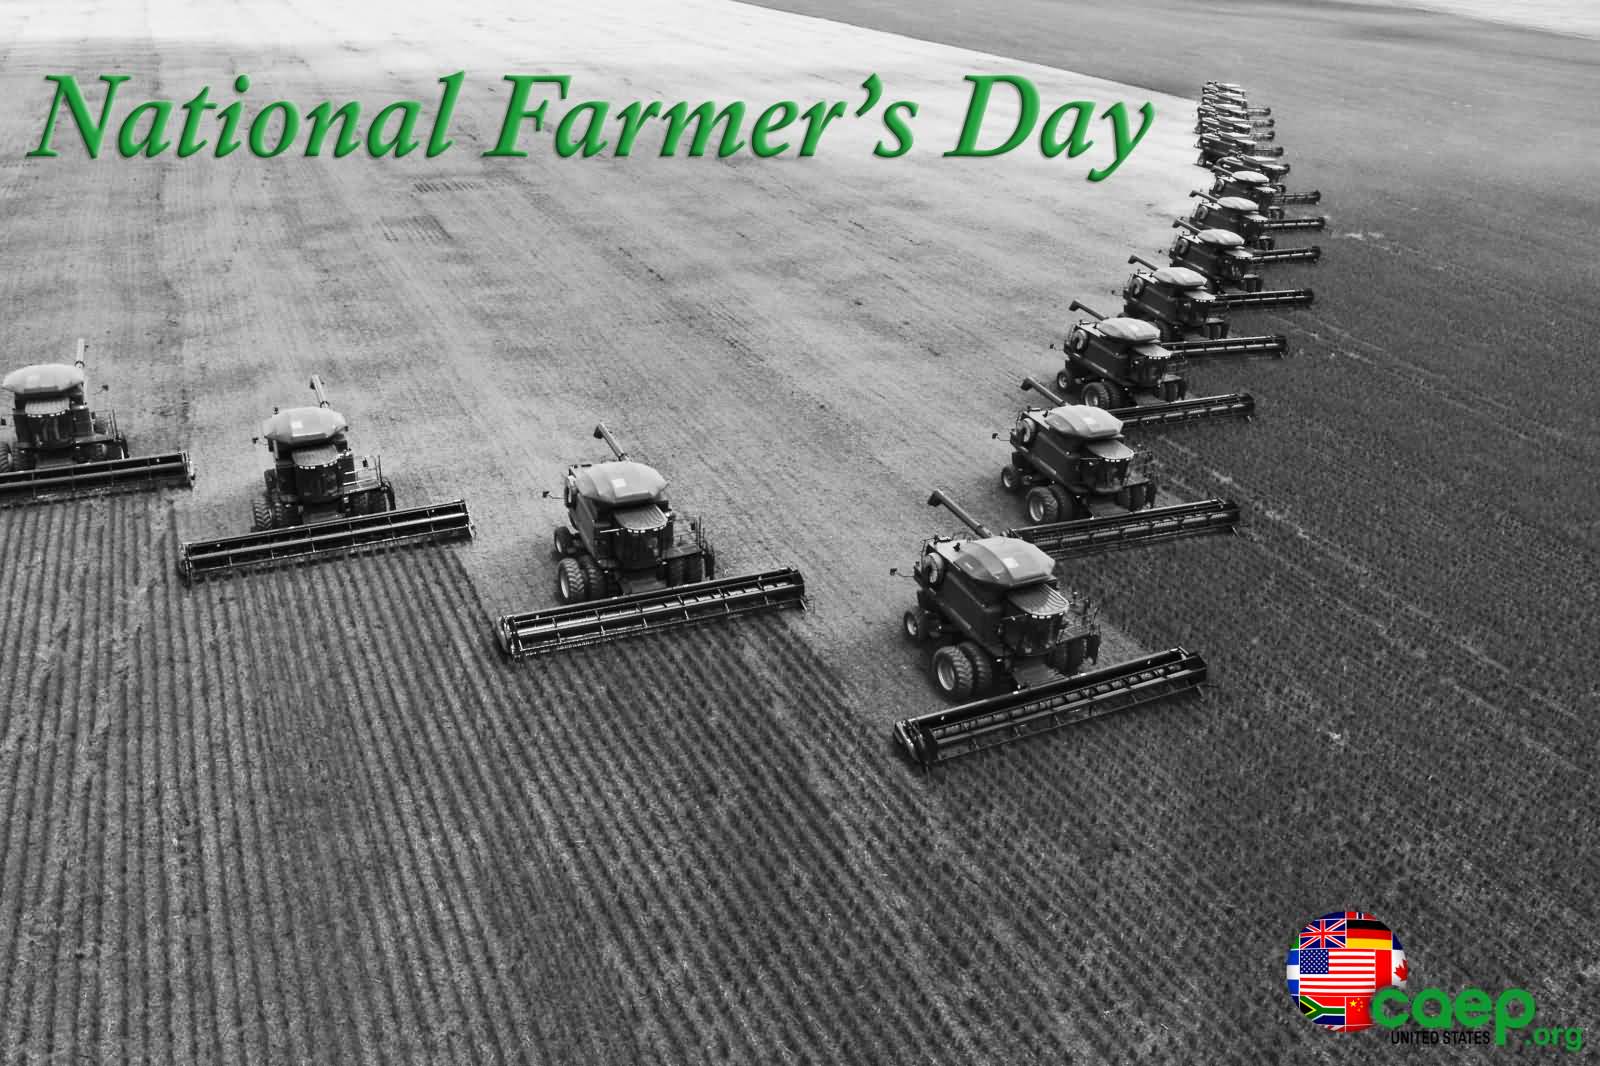 Best Farmers Day Greeting Picture And Photo